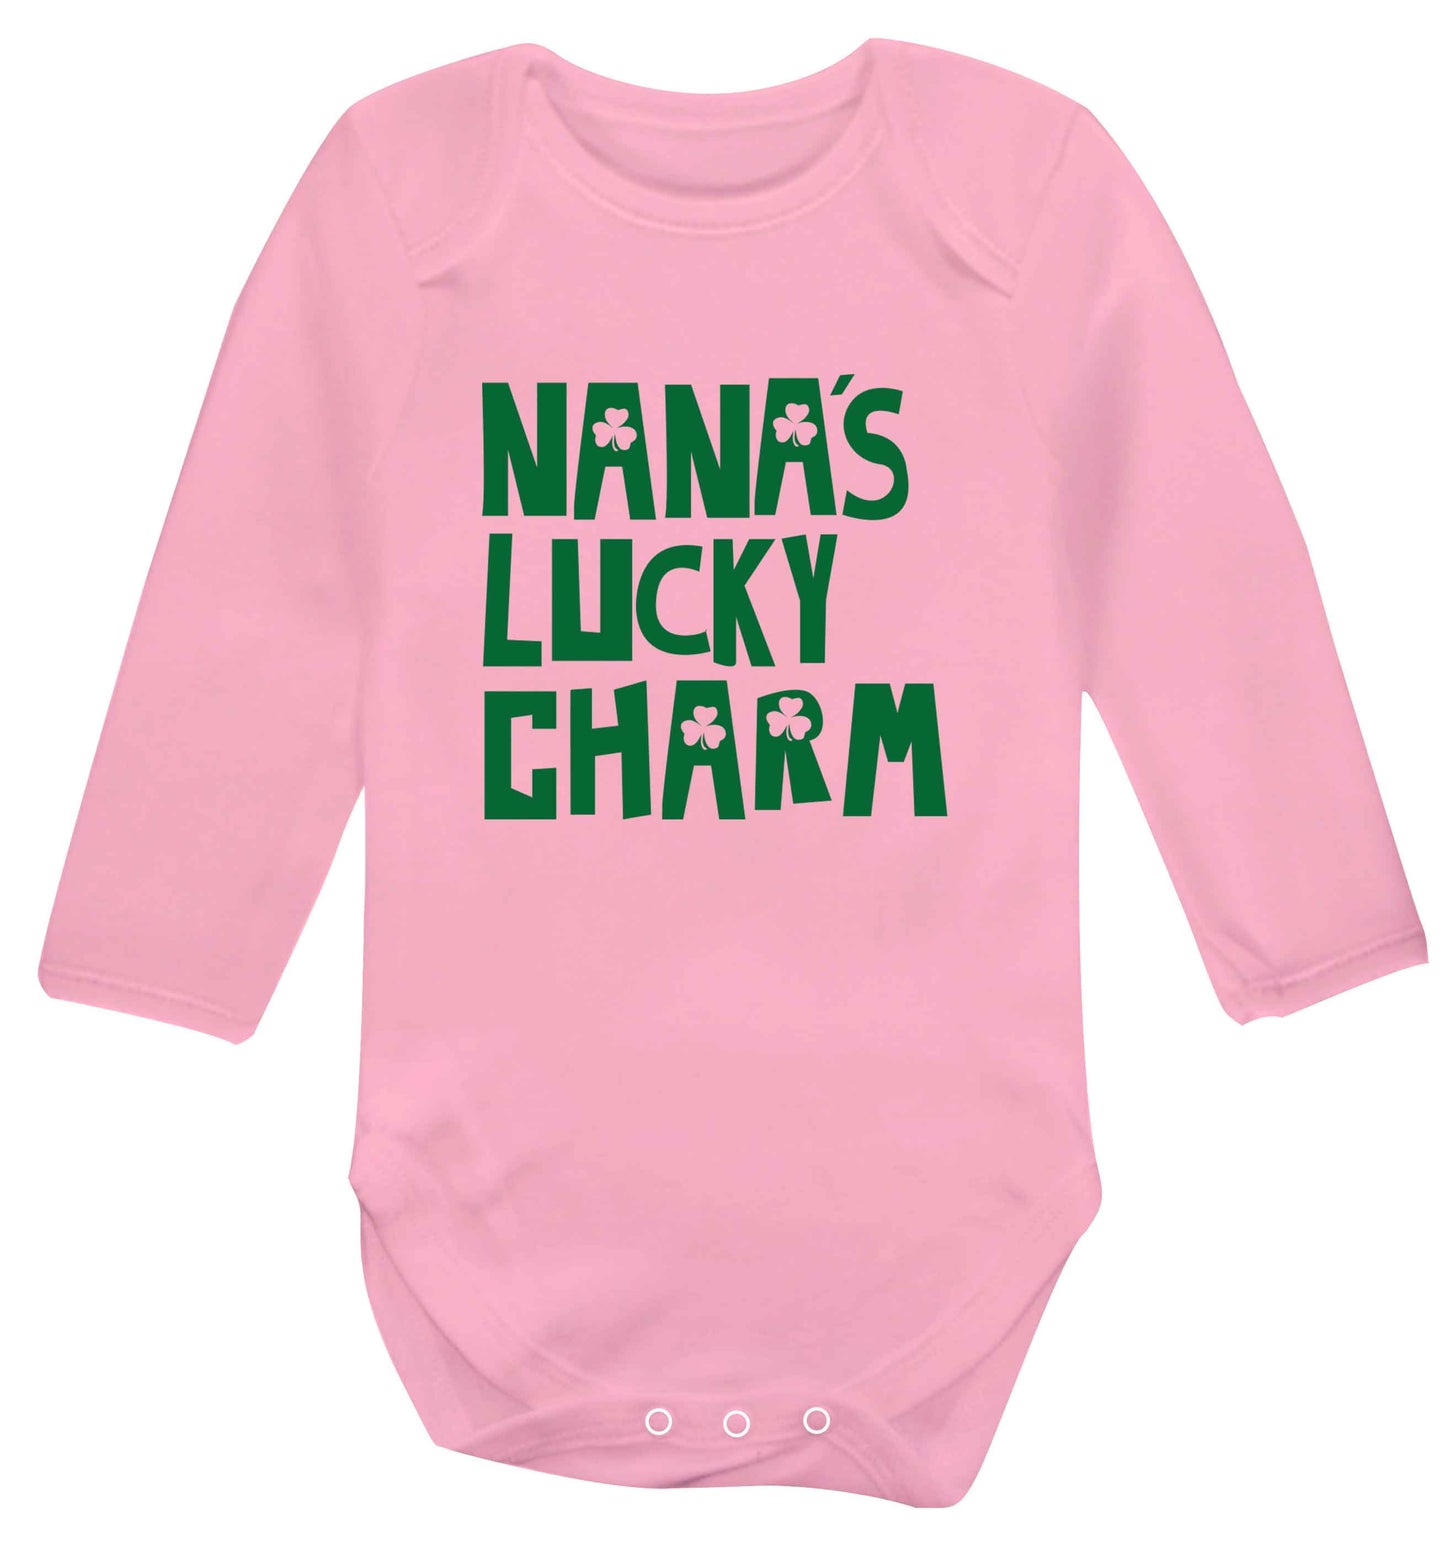 Nana's lucky charm baby vest long sleeved pale pink 6-12 months